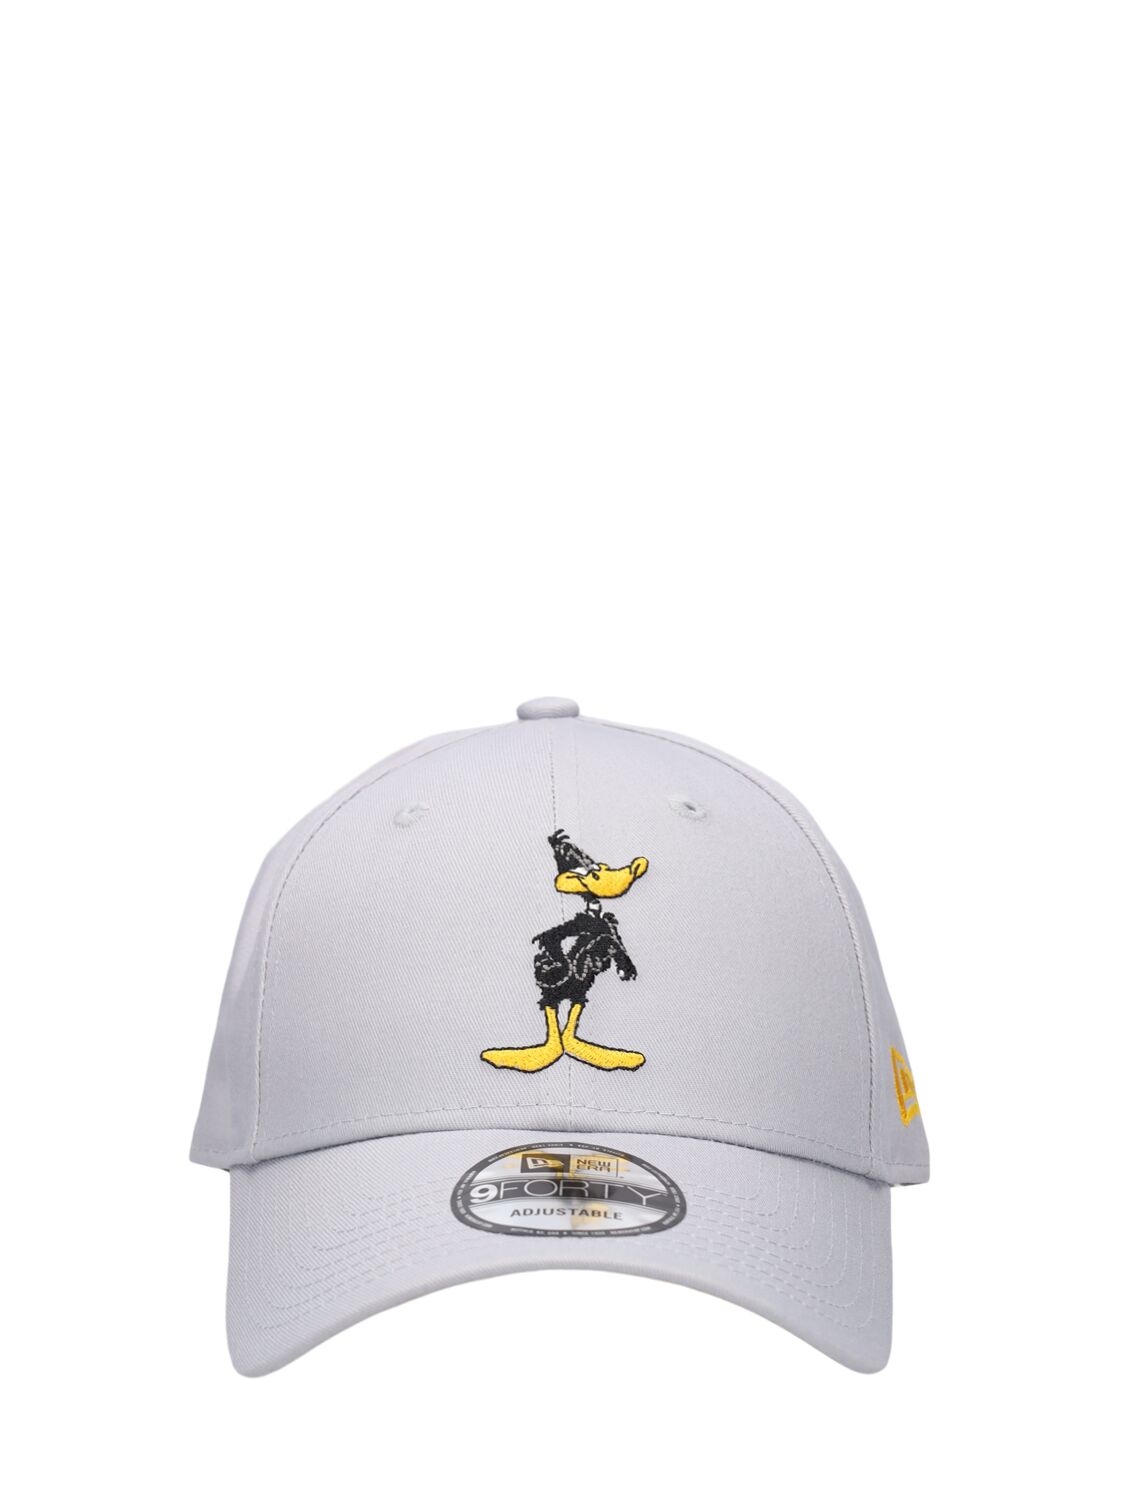 New Era Duffy Duck Looney Tunes 9forty Cap In White